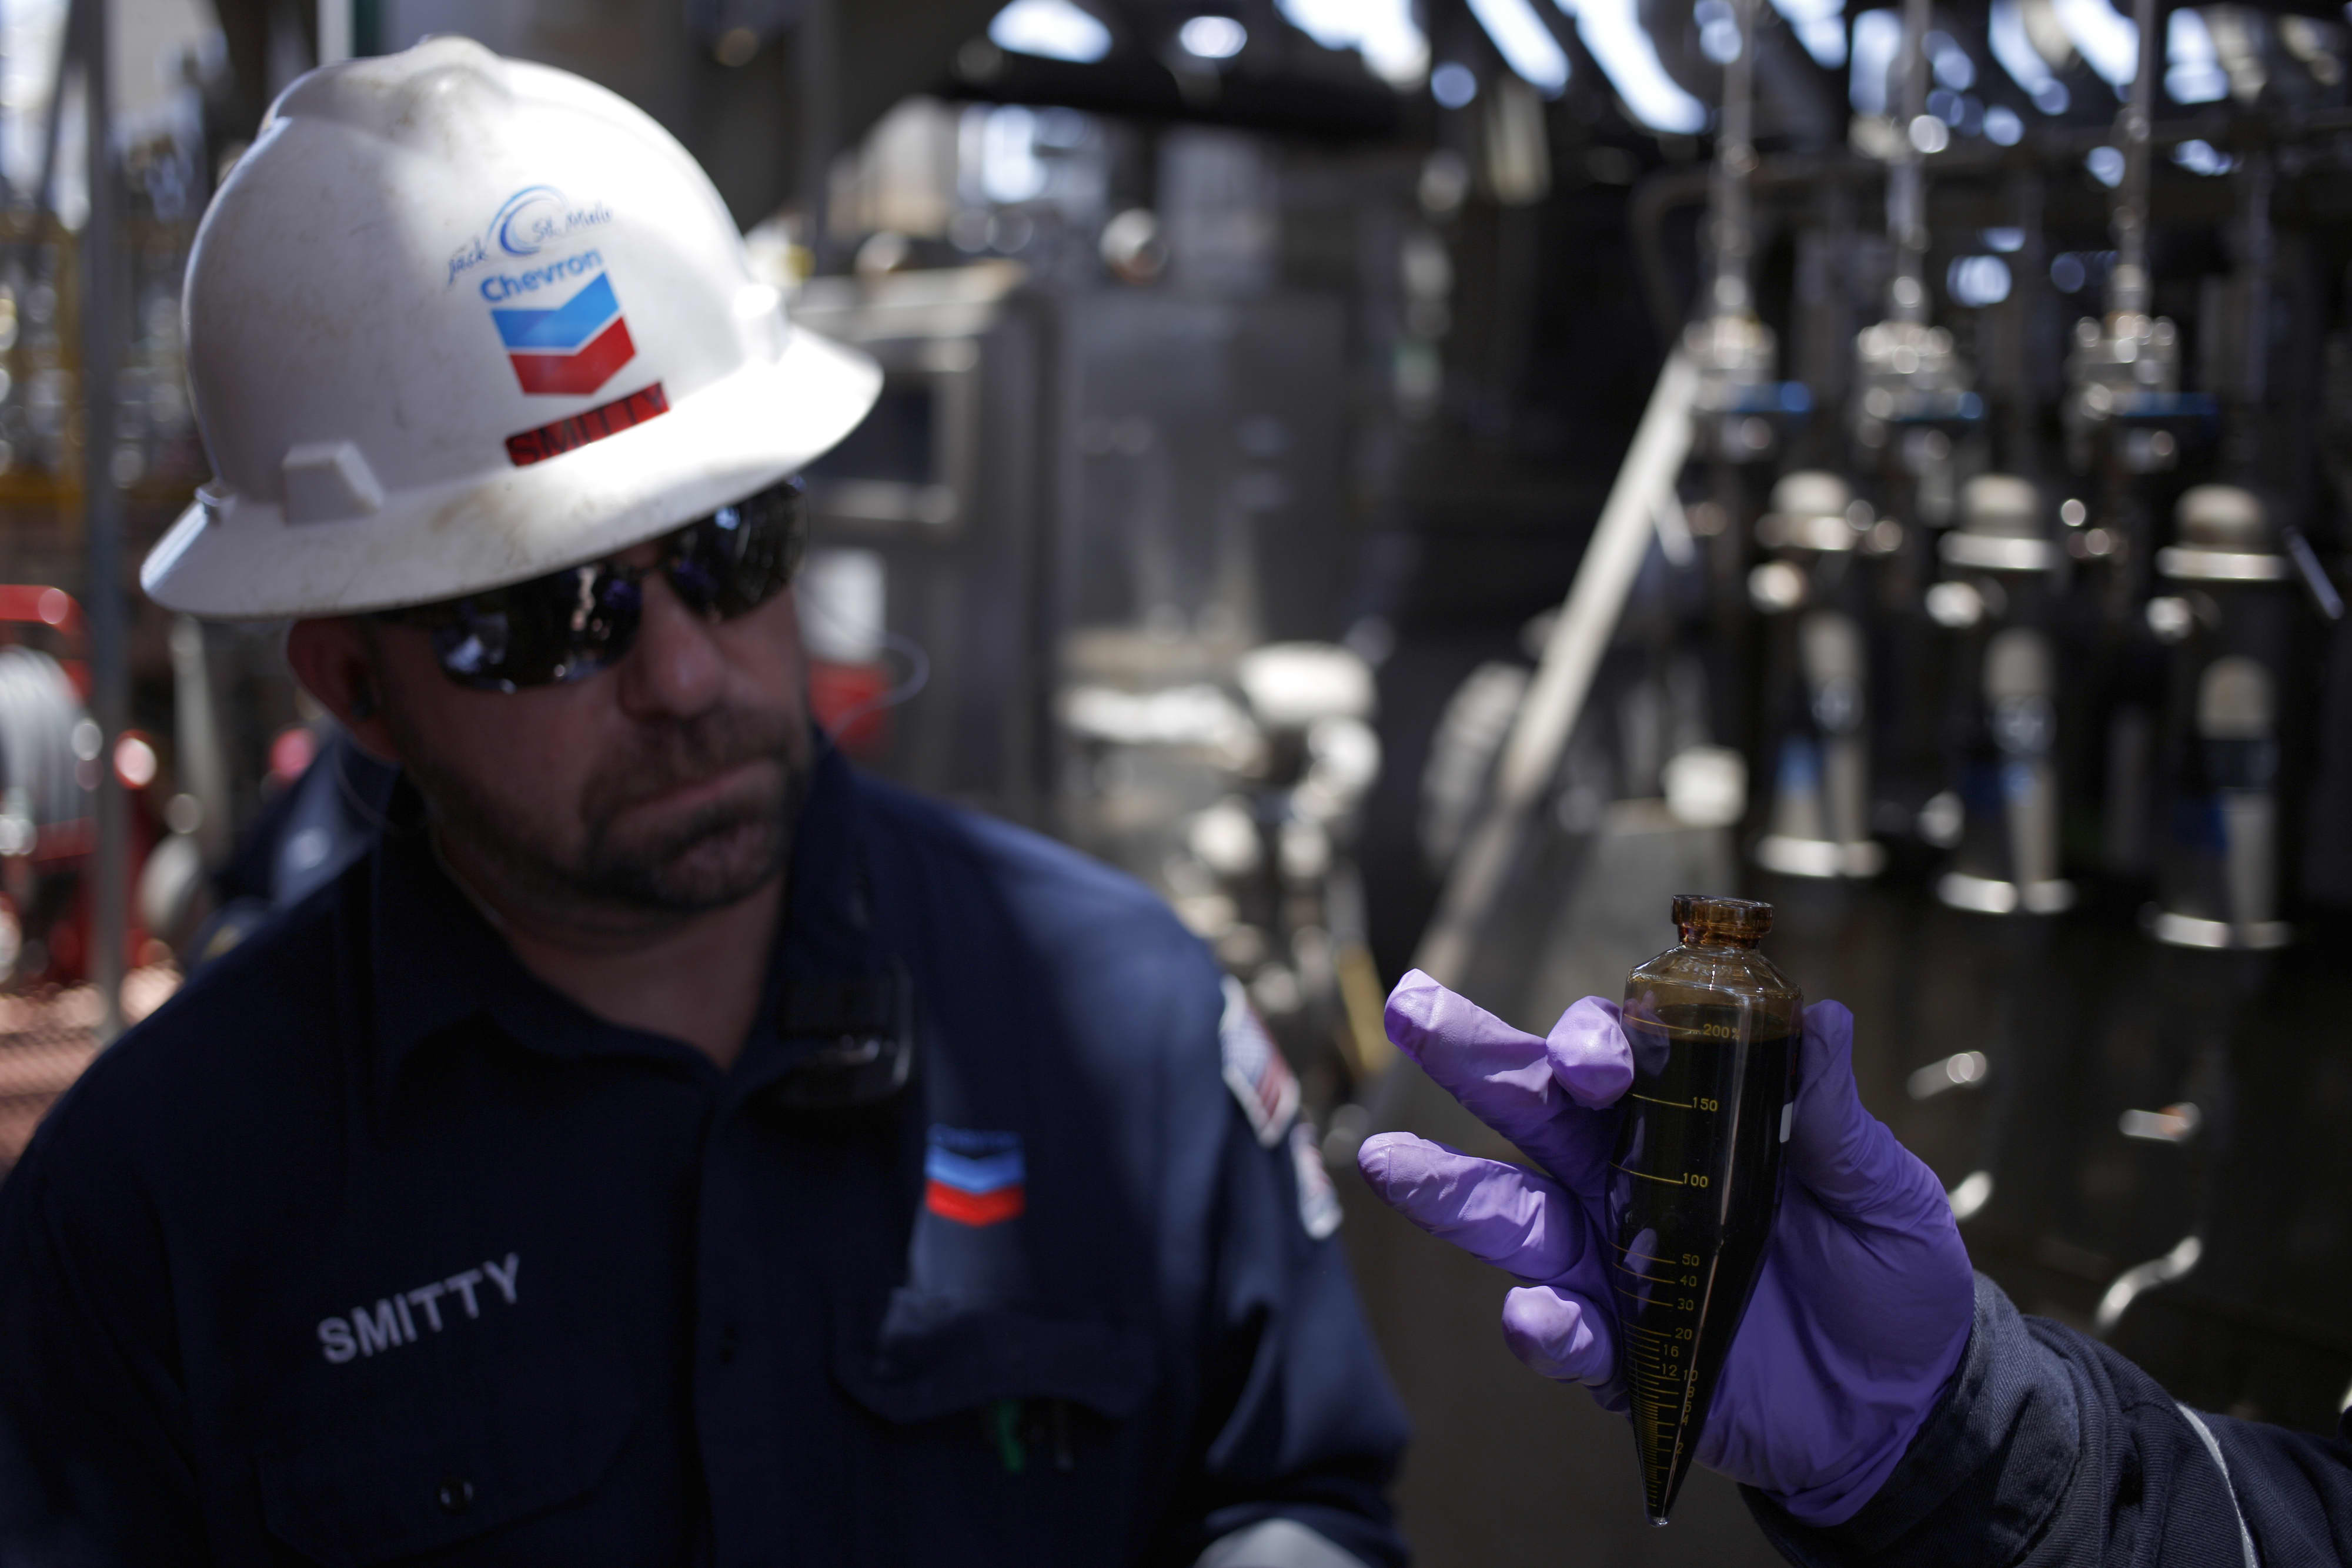 Morgan Stanley downgrades energy stocks Chevron and Occidental, citing valuation concerns